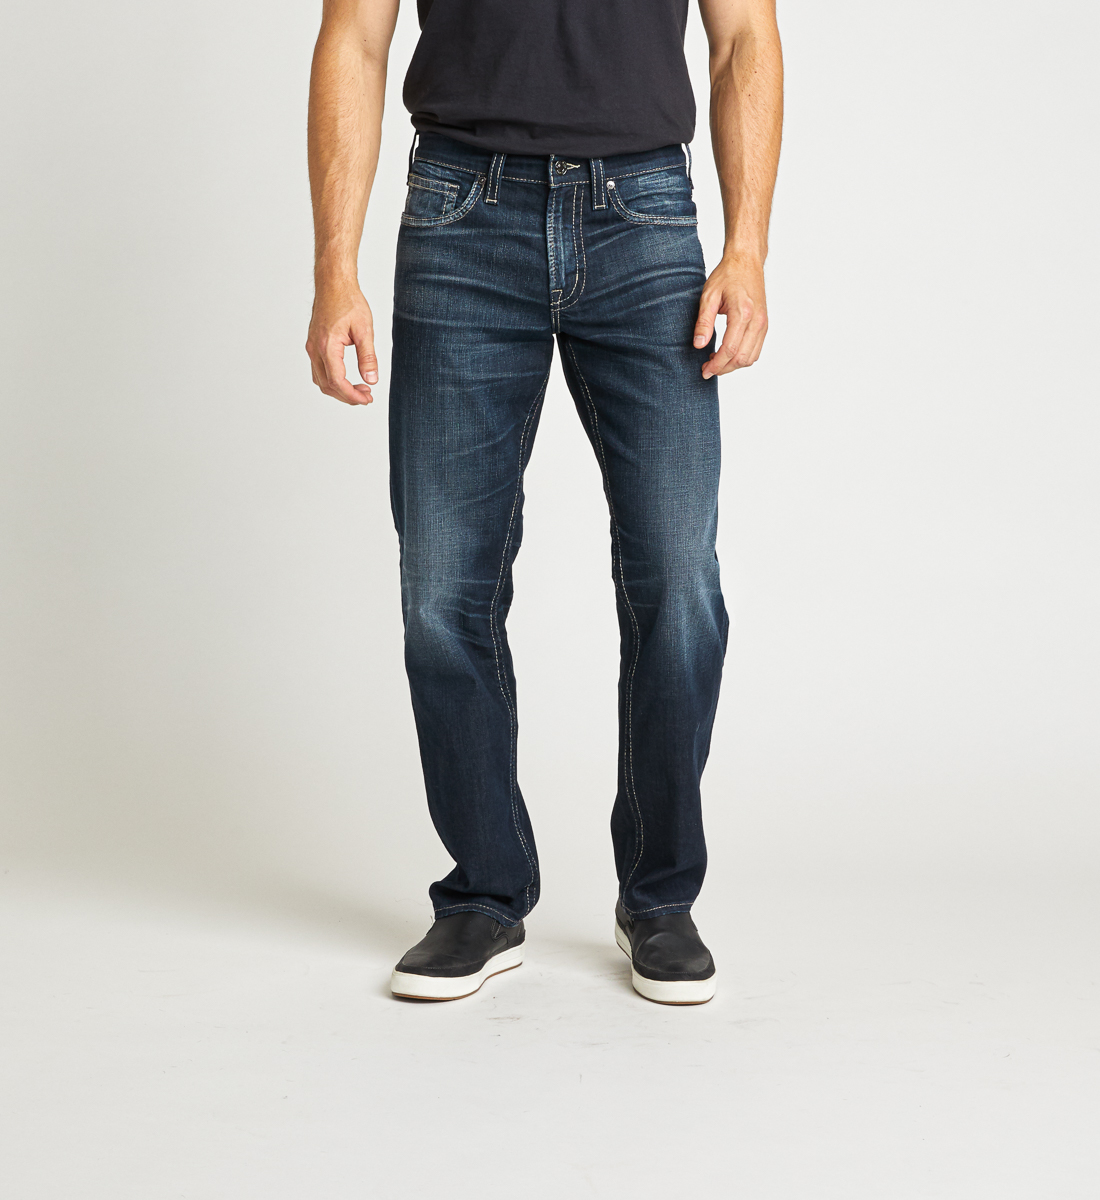 relaxed fit jeans with tapered leg